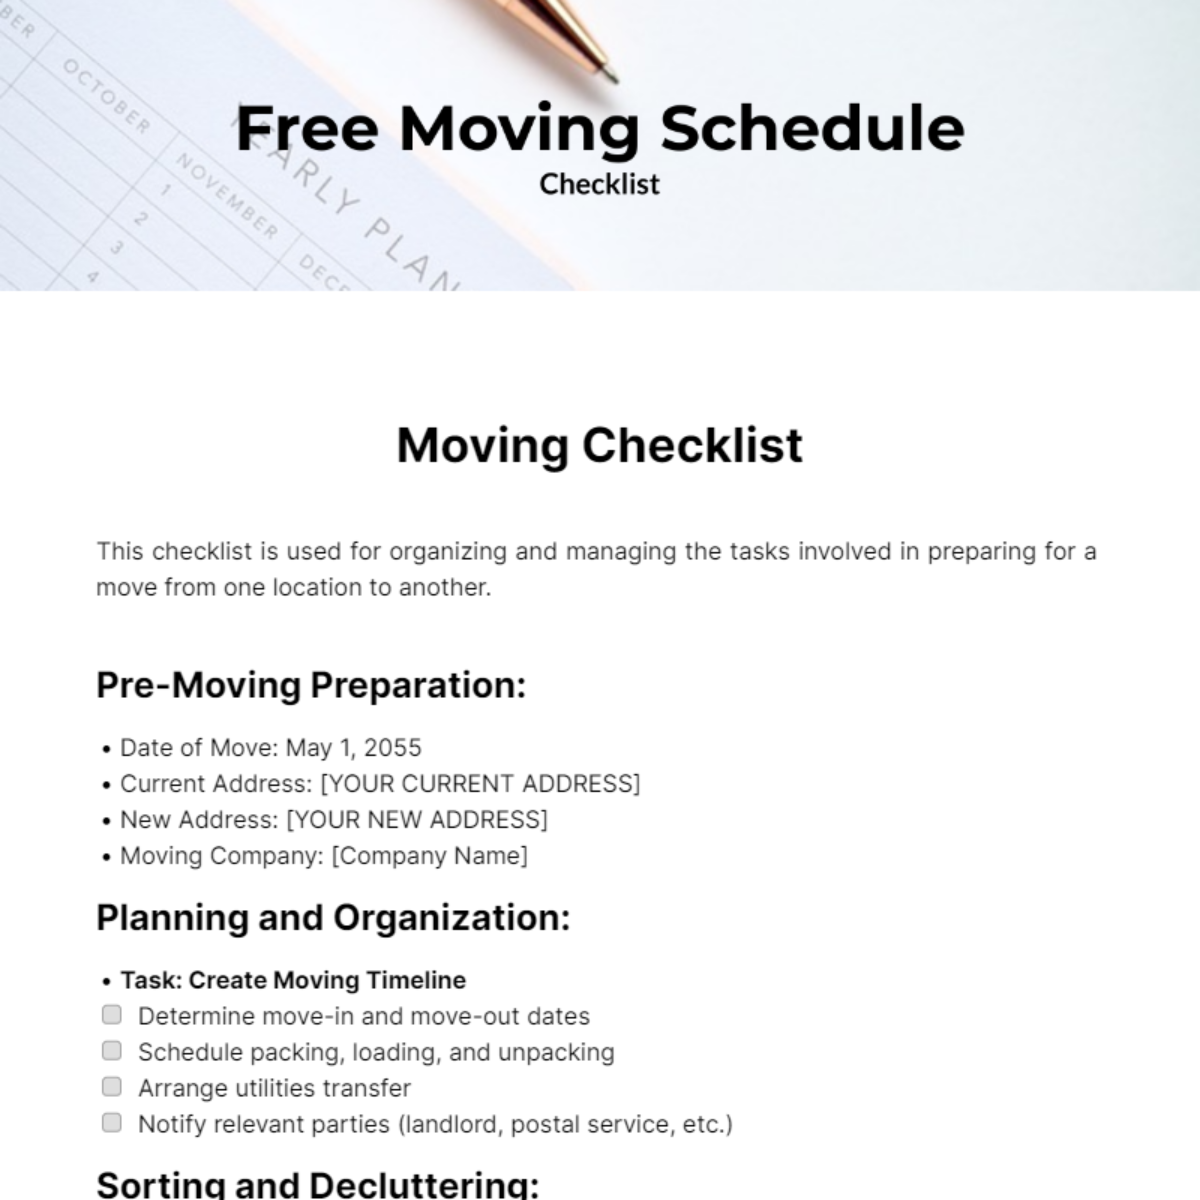 Free Moving Schedule Checklist Template